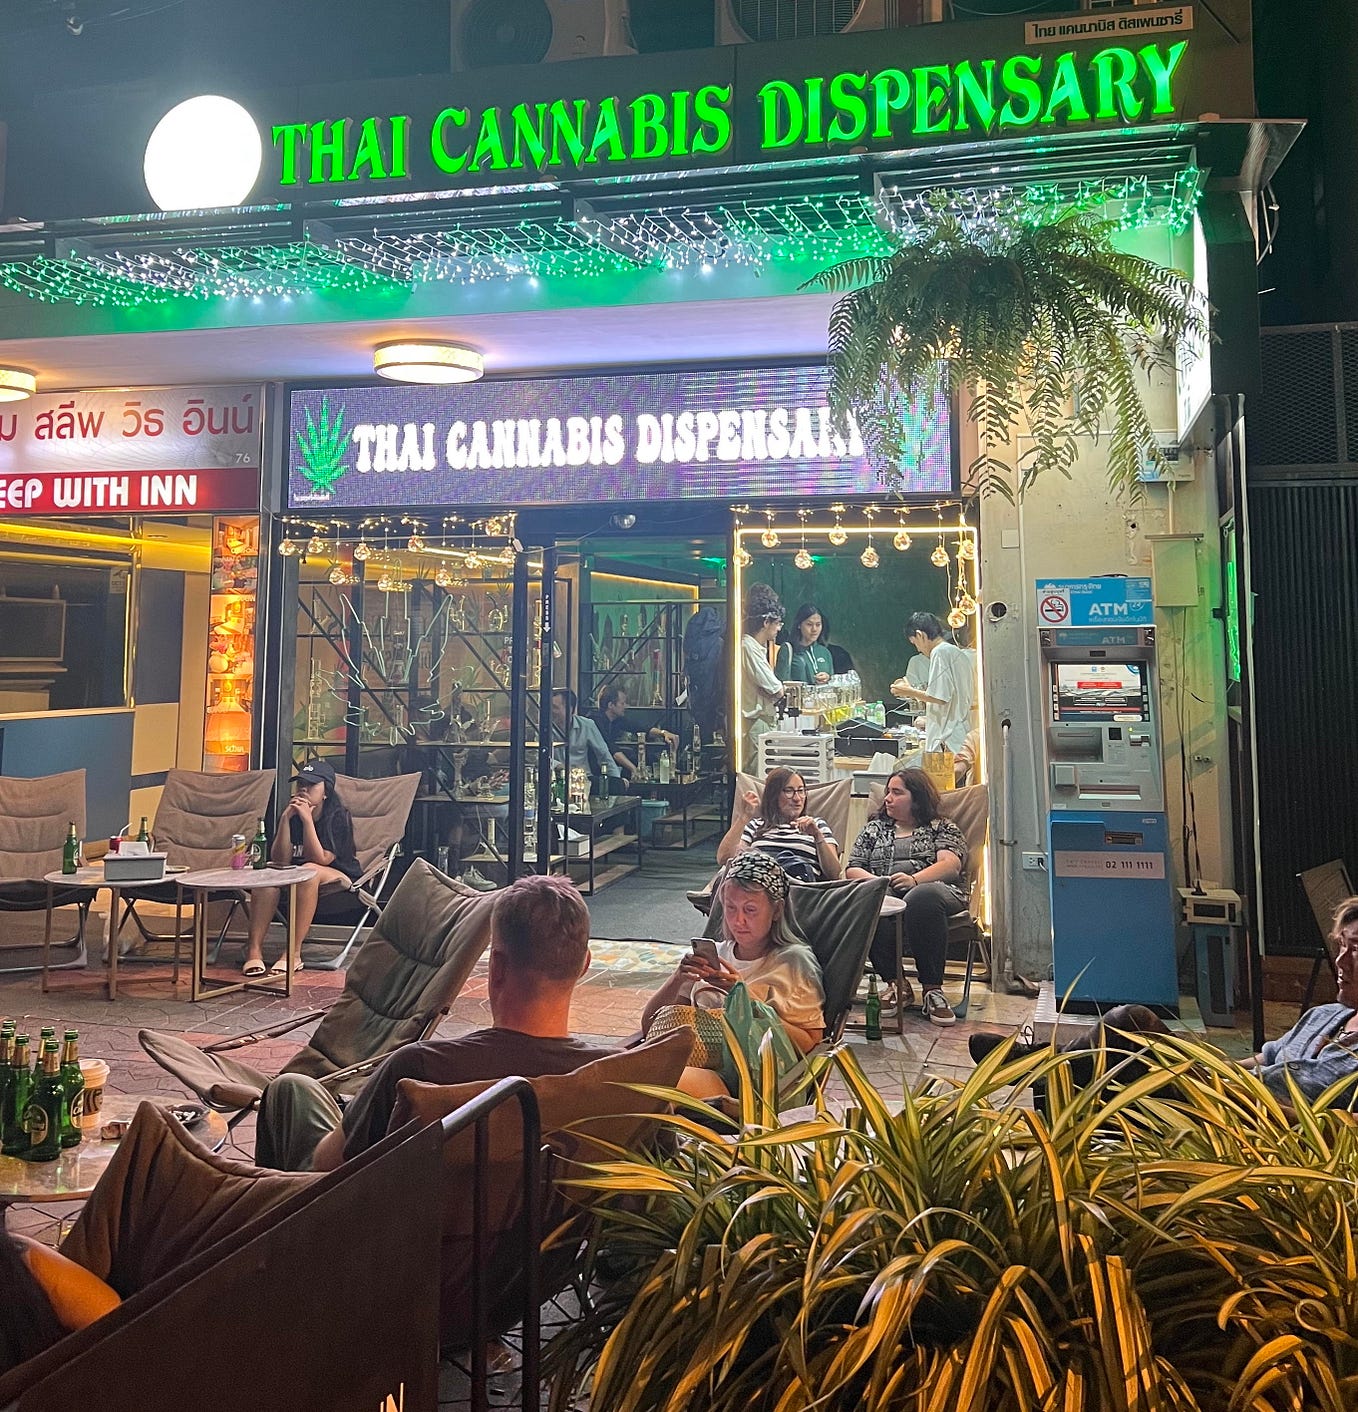 The King’s weed: reporting on legalization in Thailand